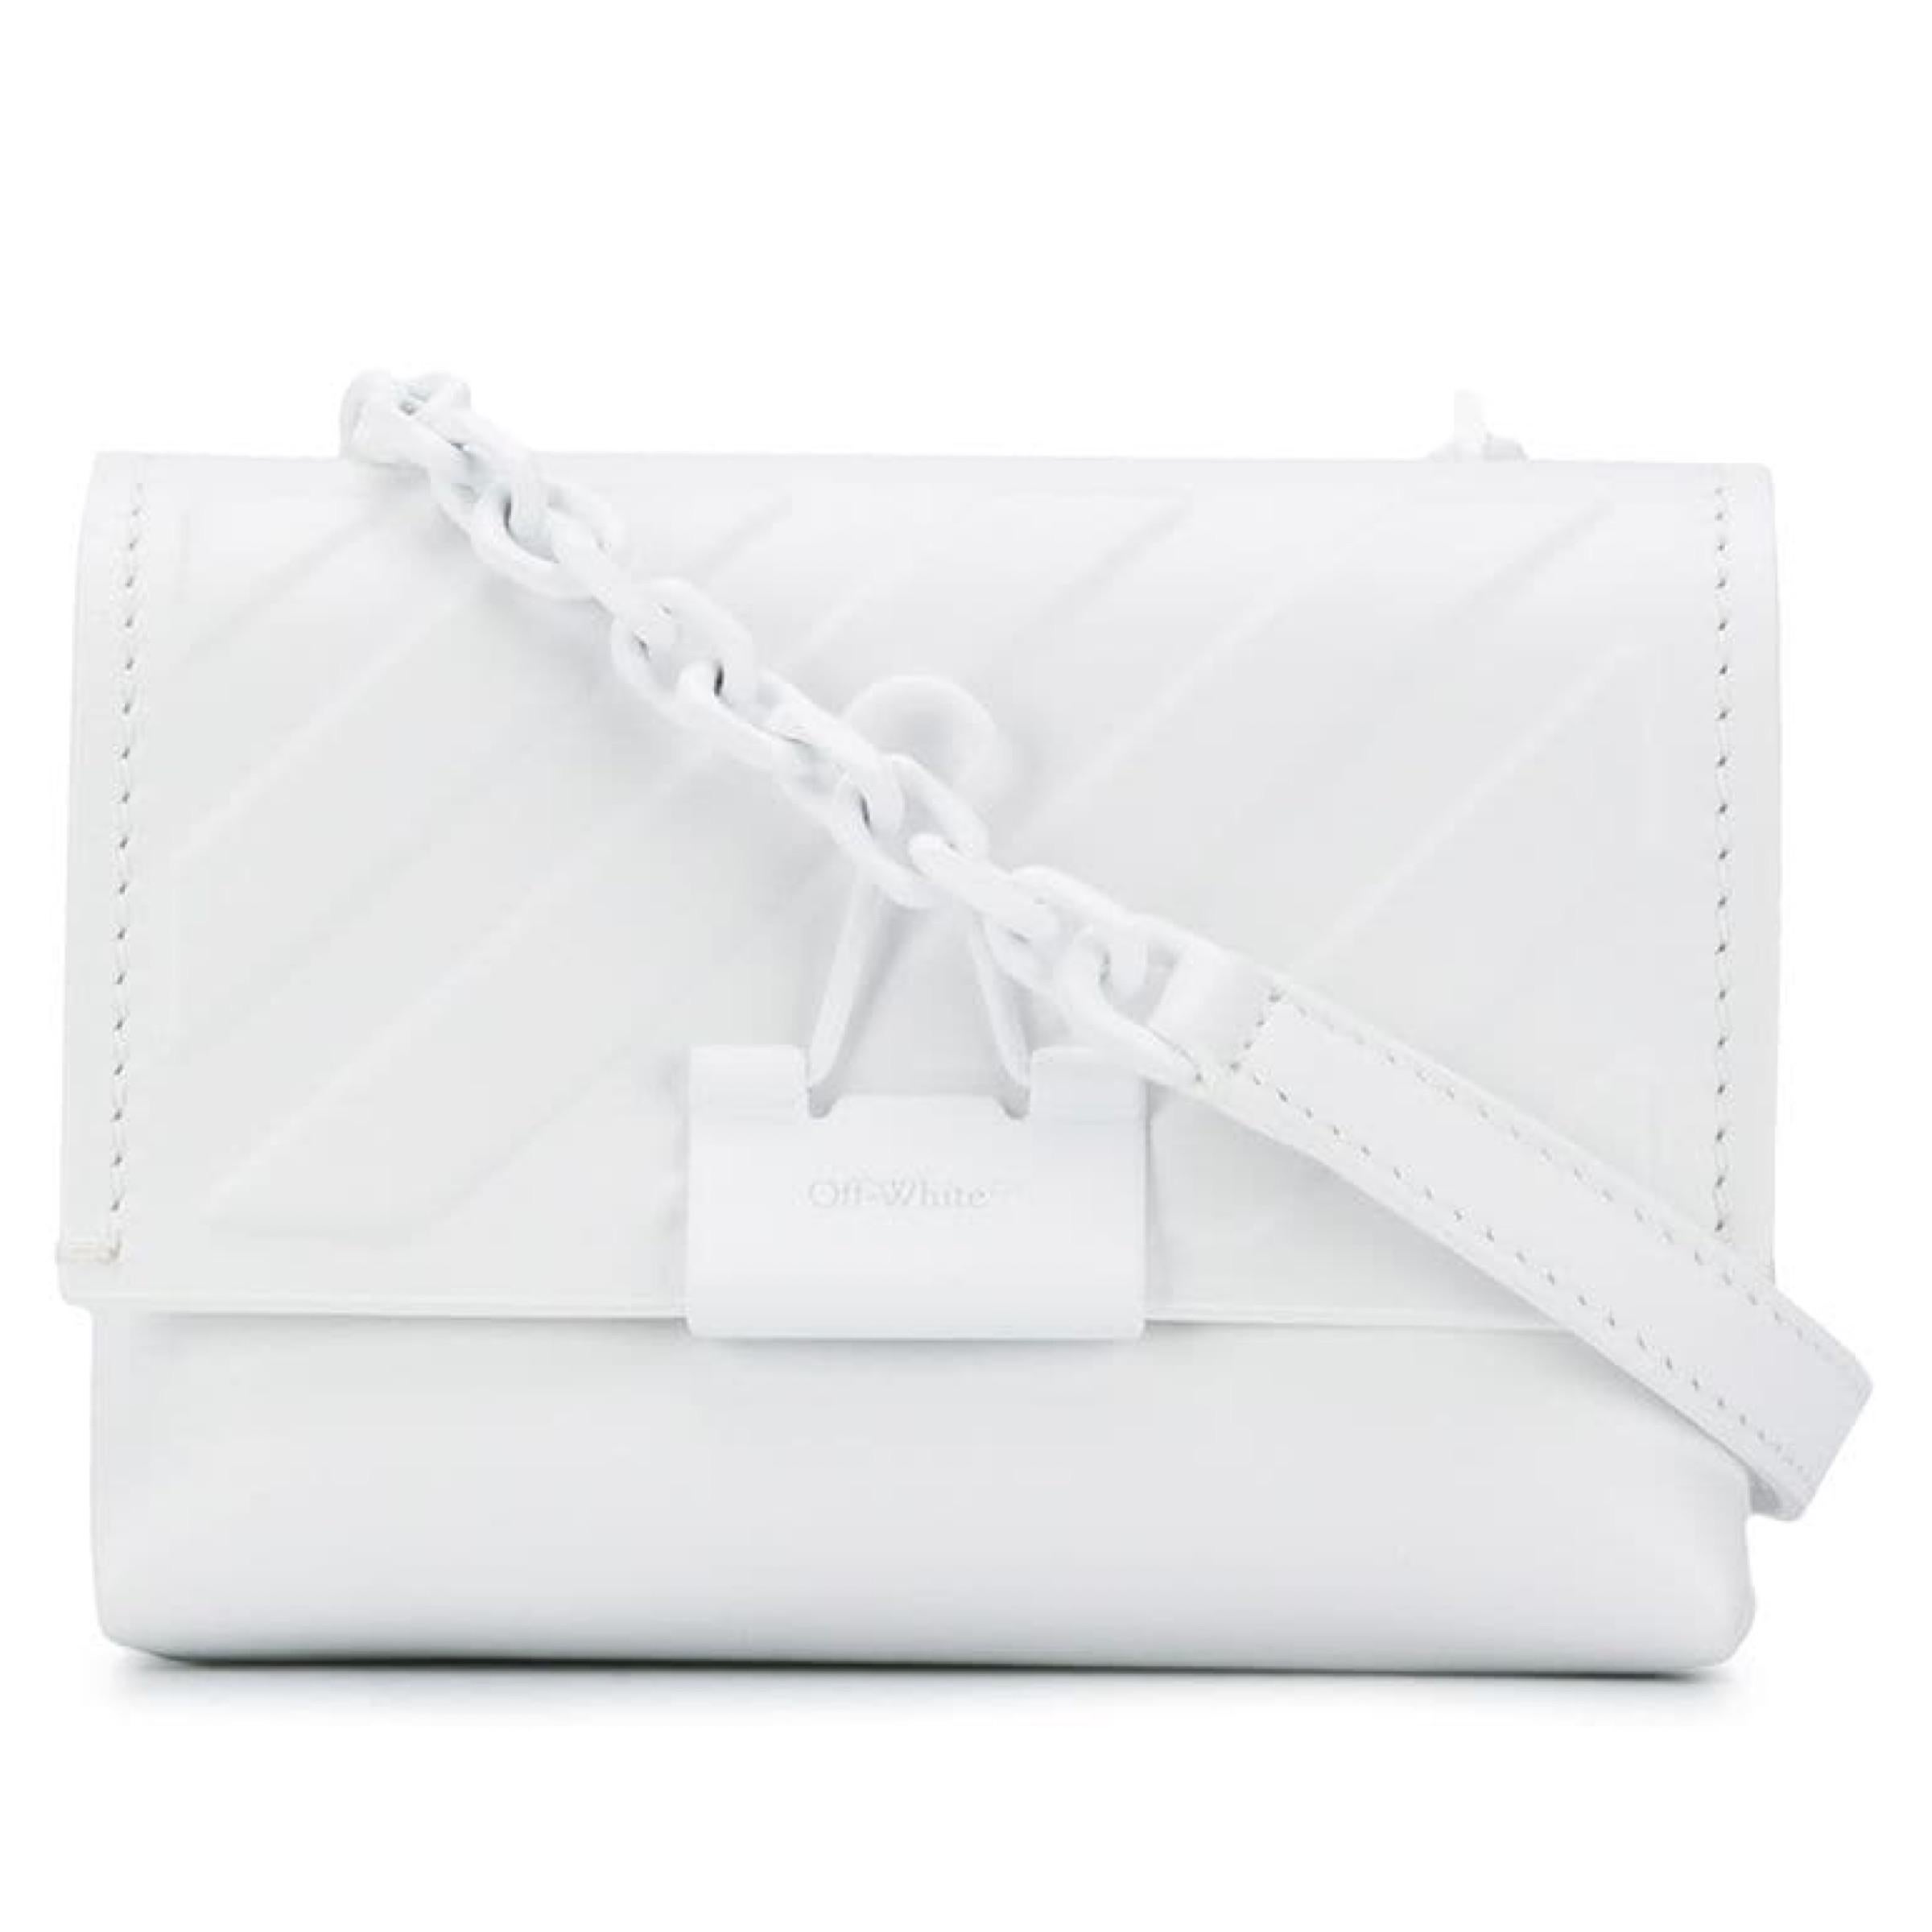 New Off-White Virgil Abloh White Diagonal Stripe Leather Crossbody Bag

Authenticity Guaranteed

DETAILS
Brand: Off-White Virgil Abloh
Gender: Women
Category: Crossbody bag
Condition: Brand new
Color: White
Material: Leather
Diagonal